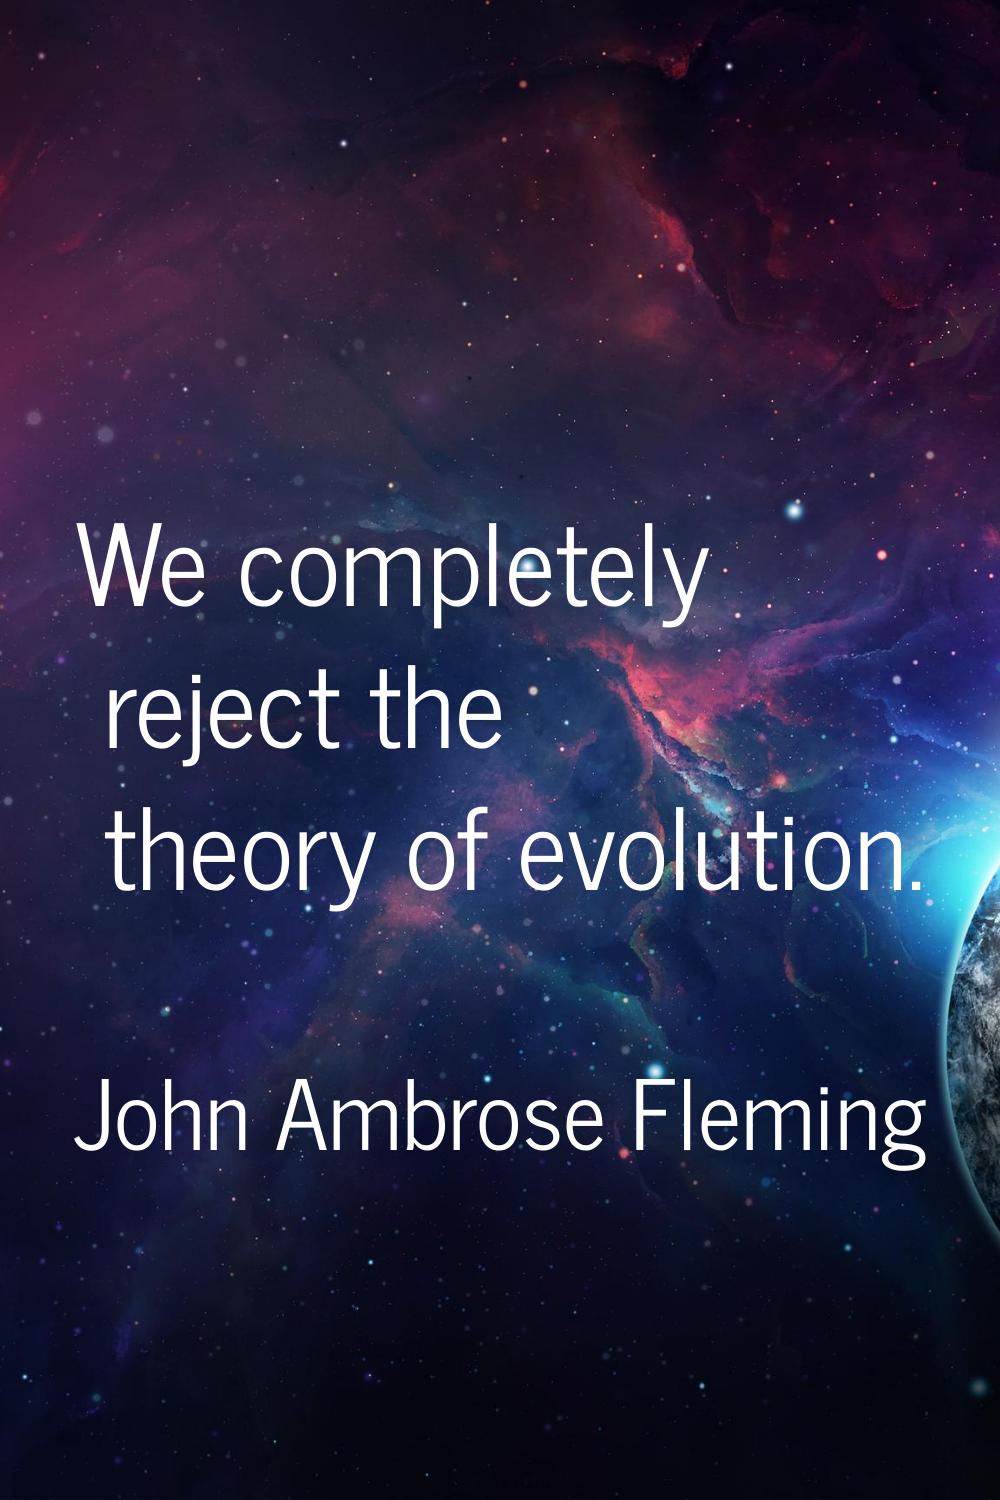 We completely reject the theory of evolution.